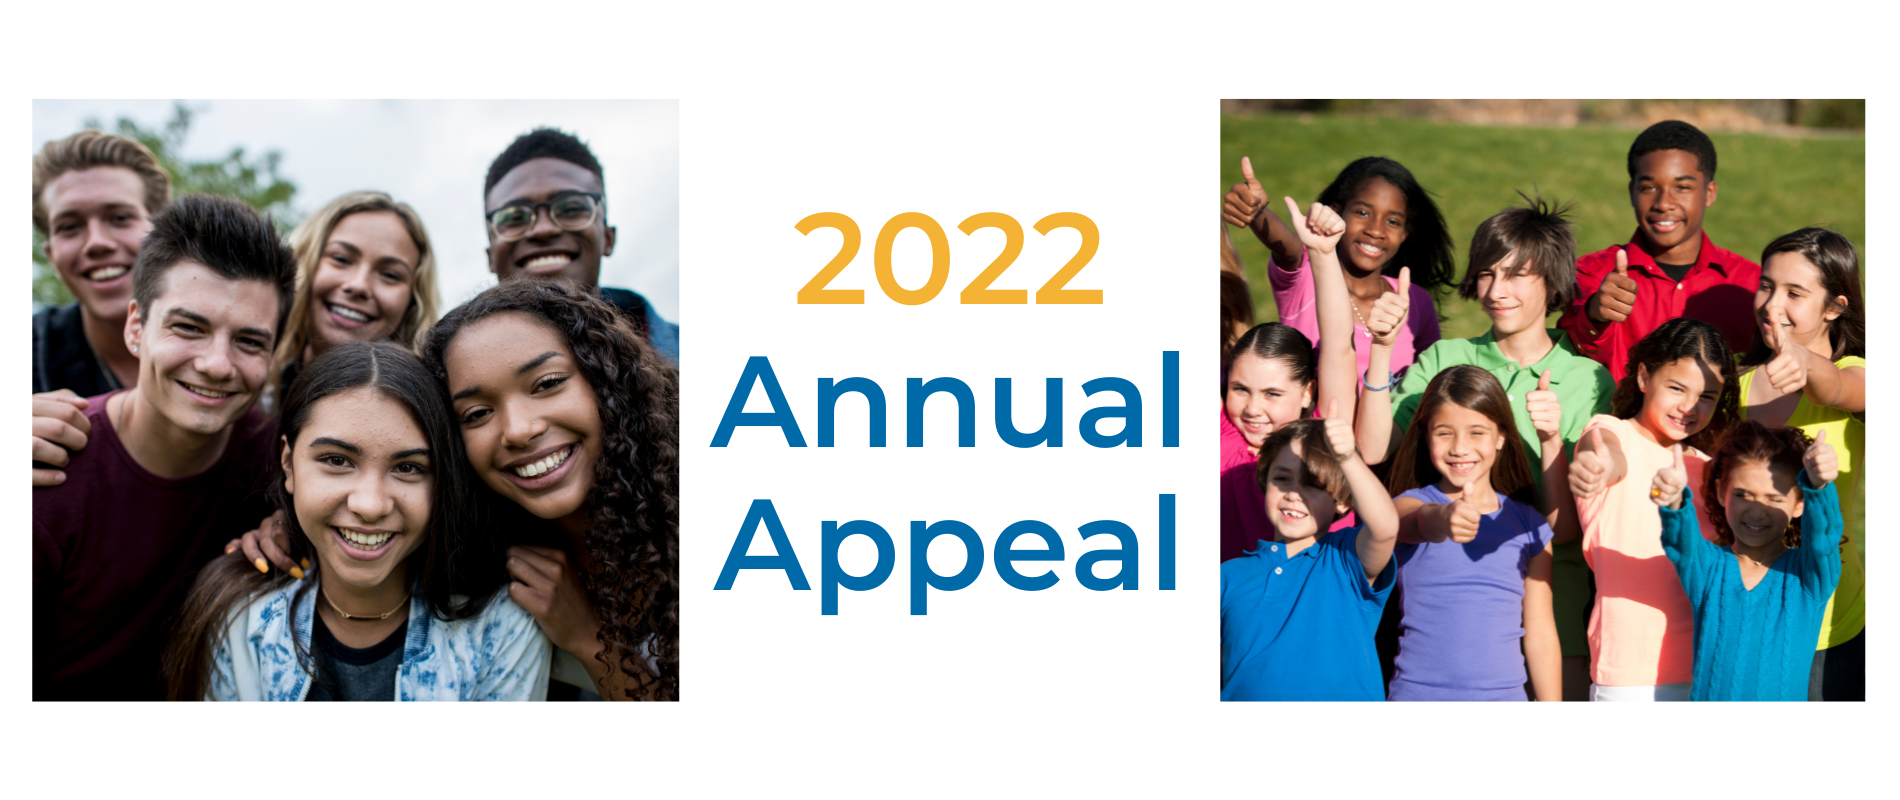 2022 Annual Appeal Banner